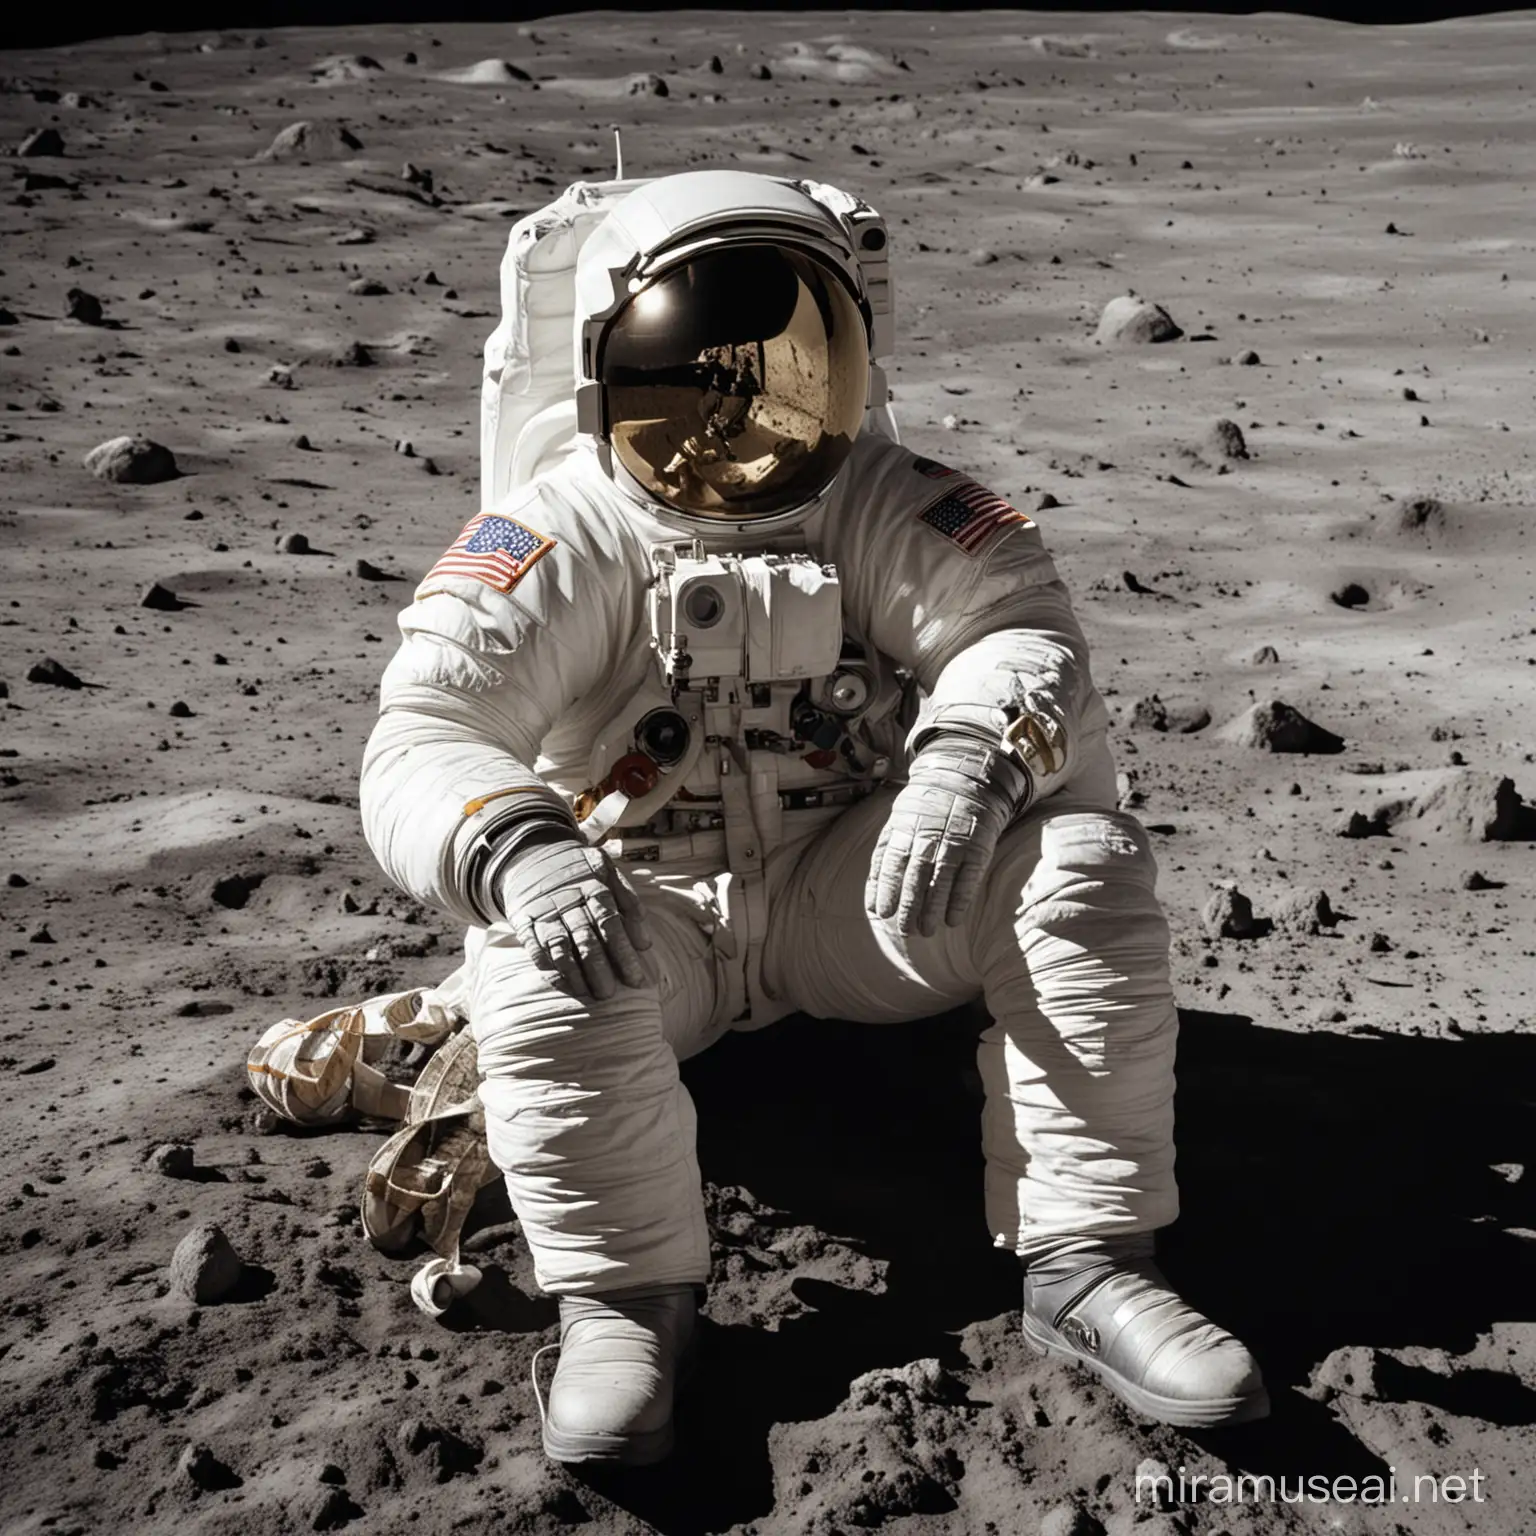 Lonely Astronaut Contemplating on the Moon